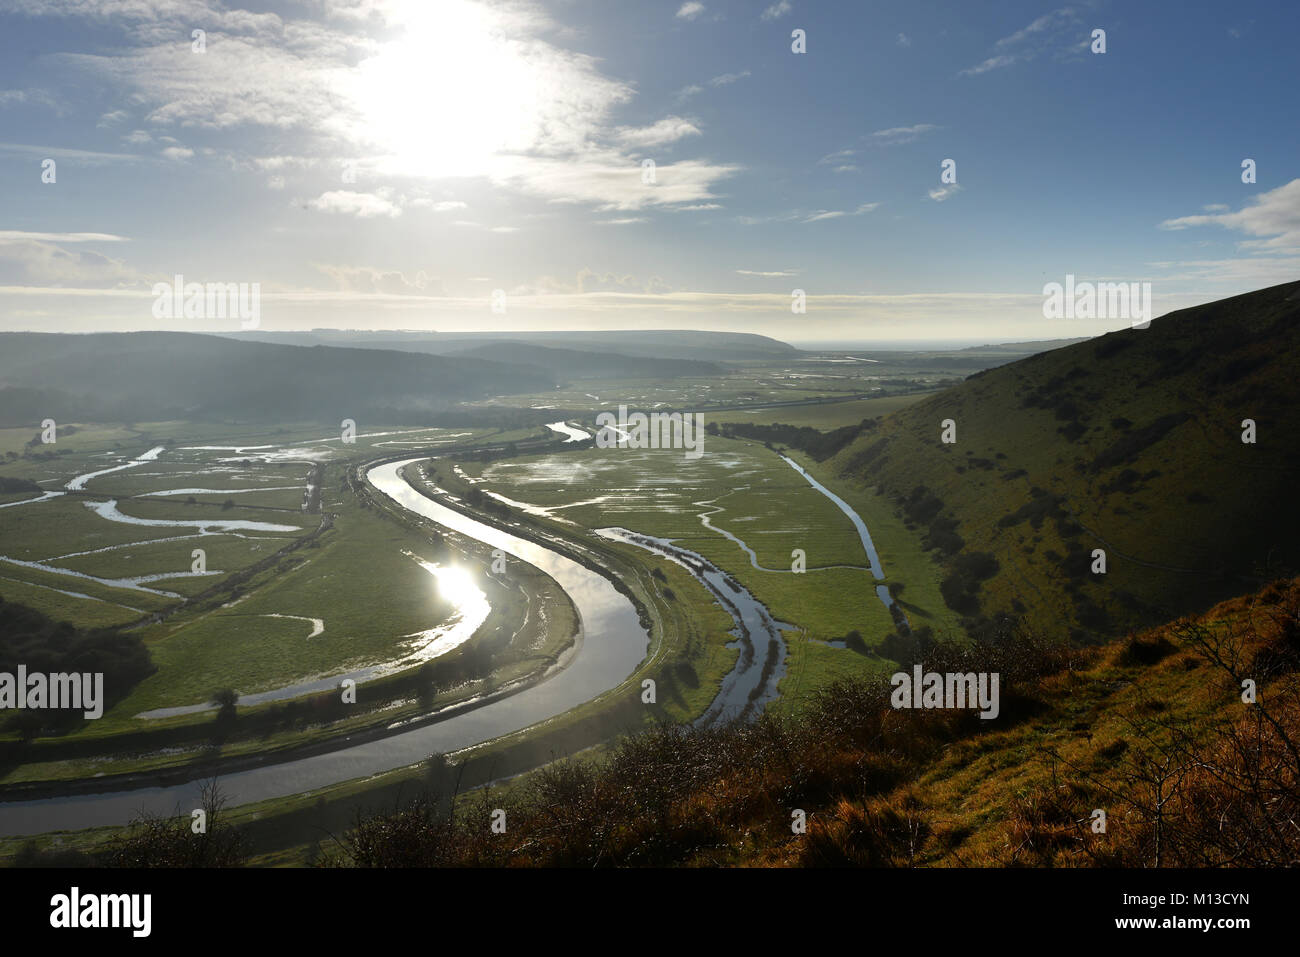 Seaford, UK. 26th January 2018. The sun shining on the river Cuckmere as it meanders through the South Downs National park near Seaford. Credit: Peter Cripps/Alamy Live News Stock Photo